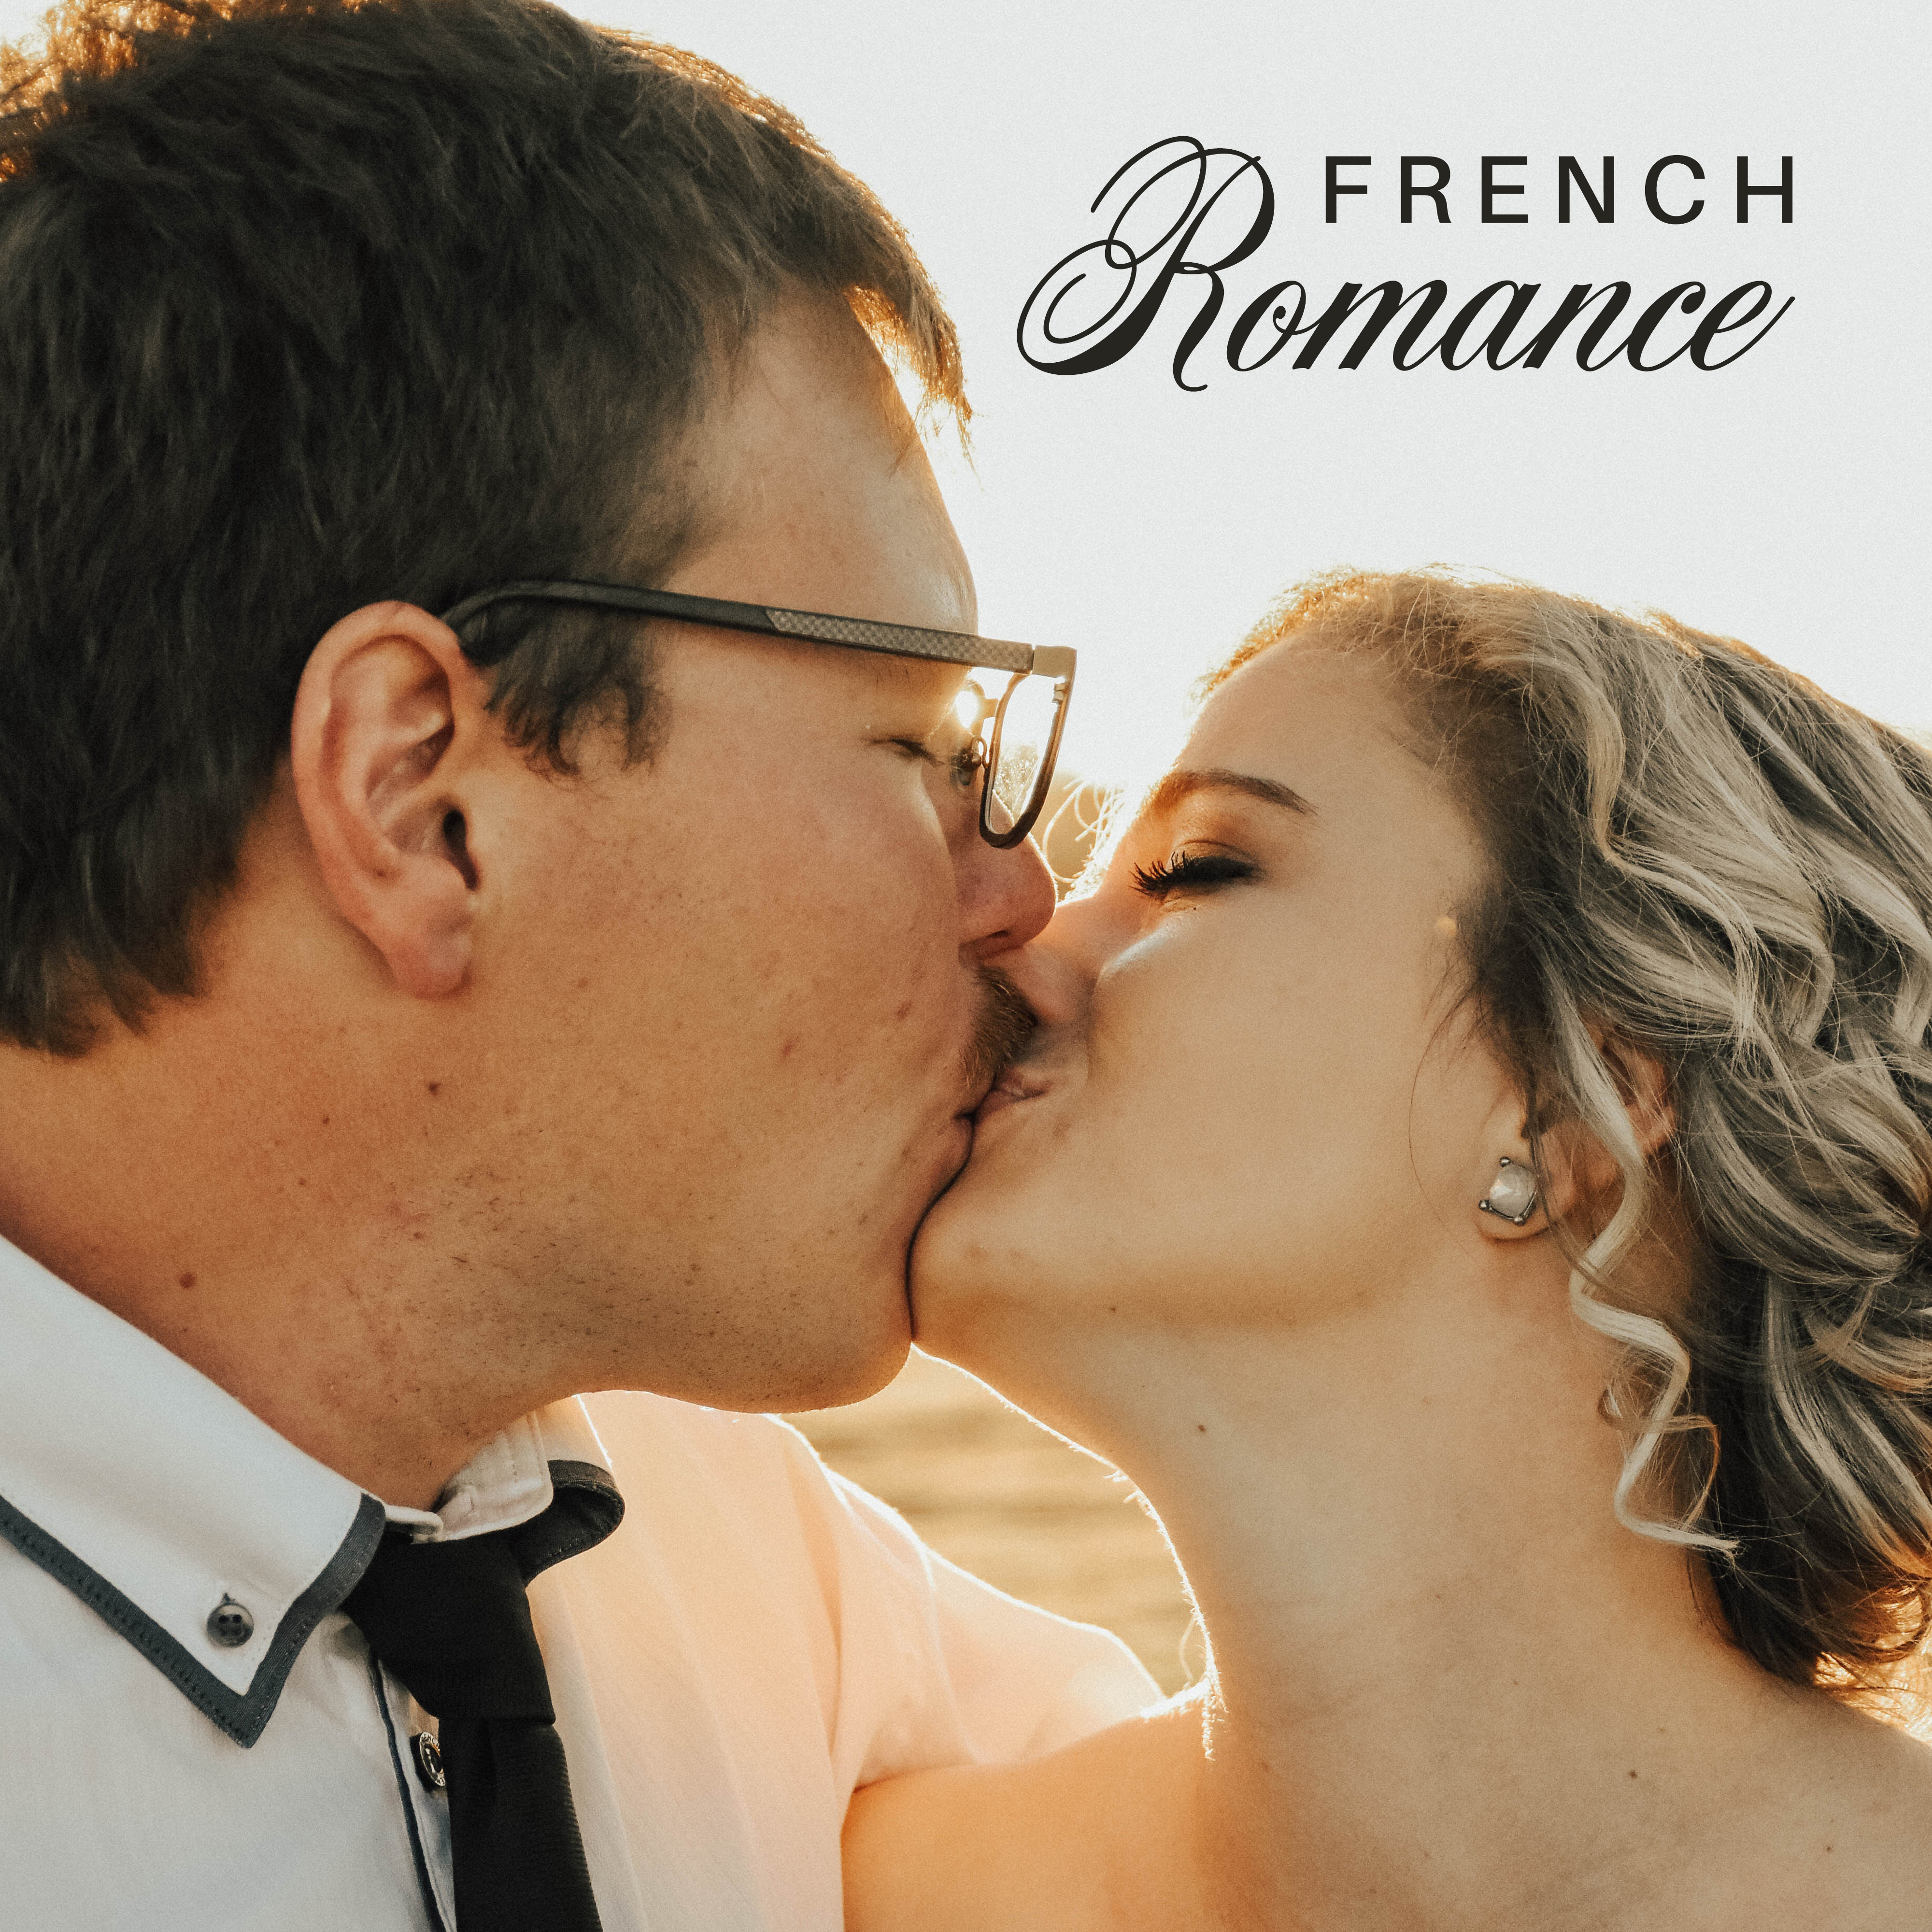 French Romance: 15 Love Jazz Songs for a Date, a Shared Dinner or a Romantic Evening just for Two